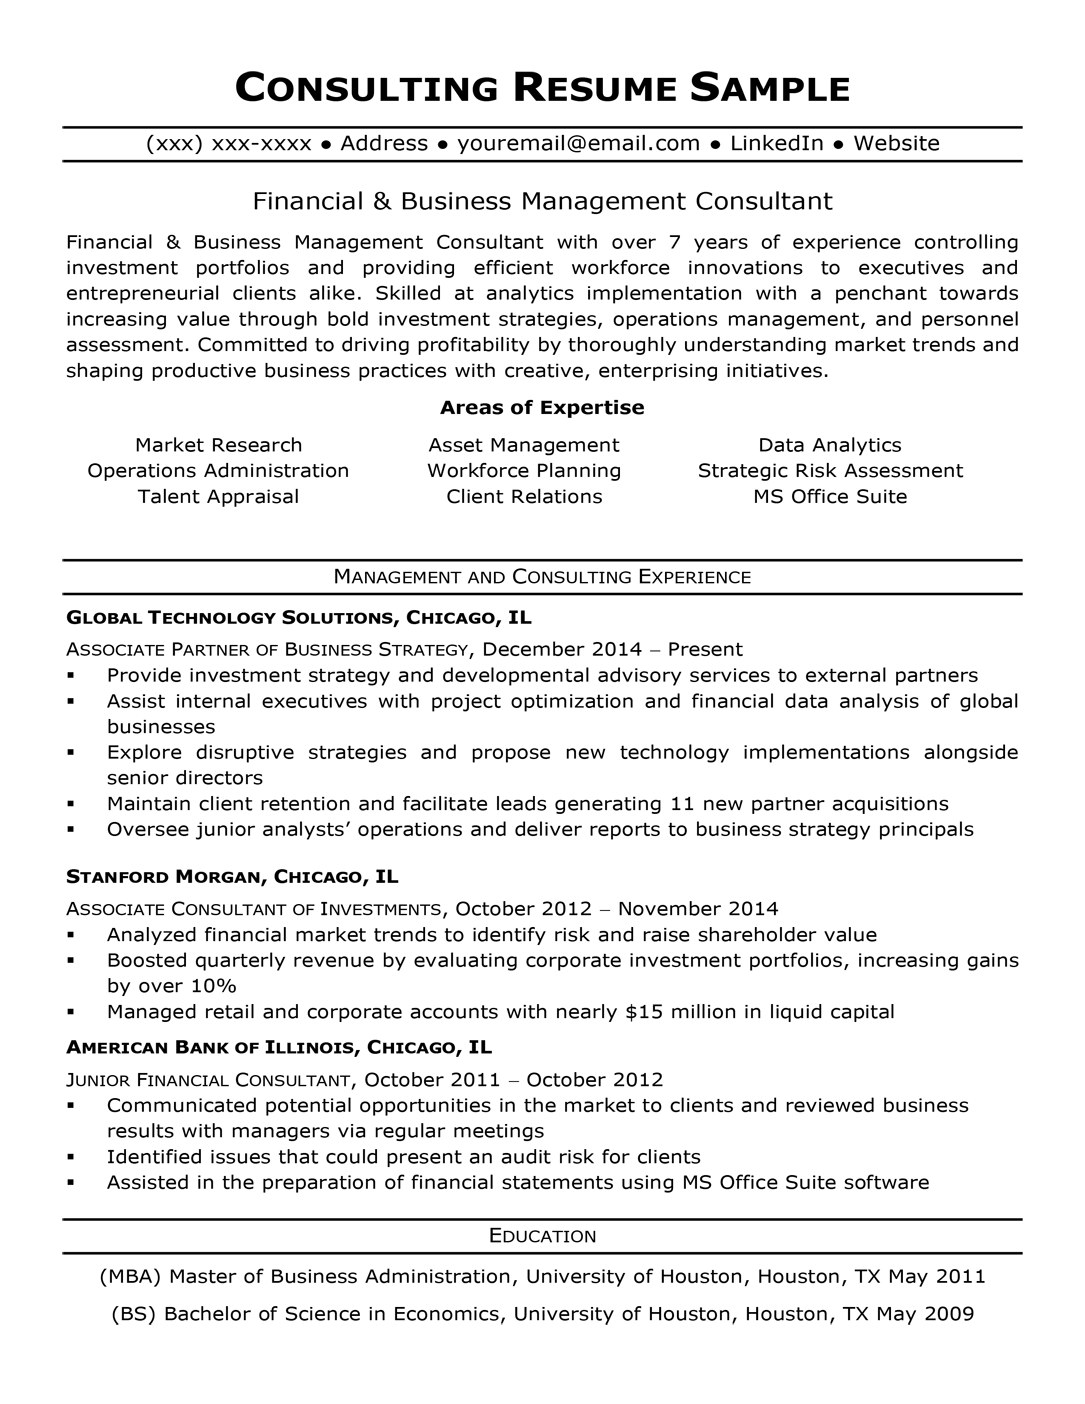 Consulting resume sample